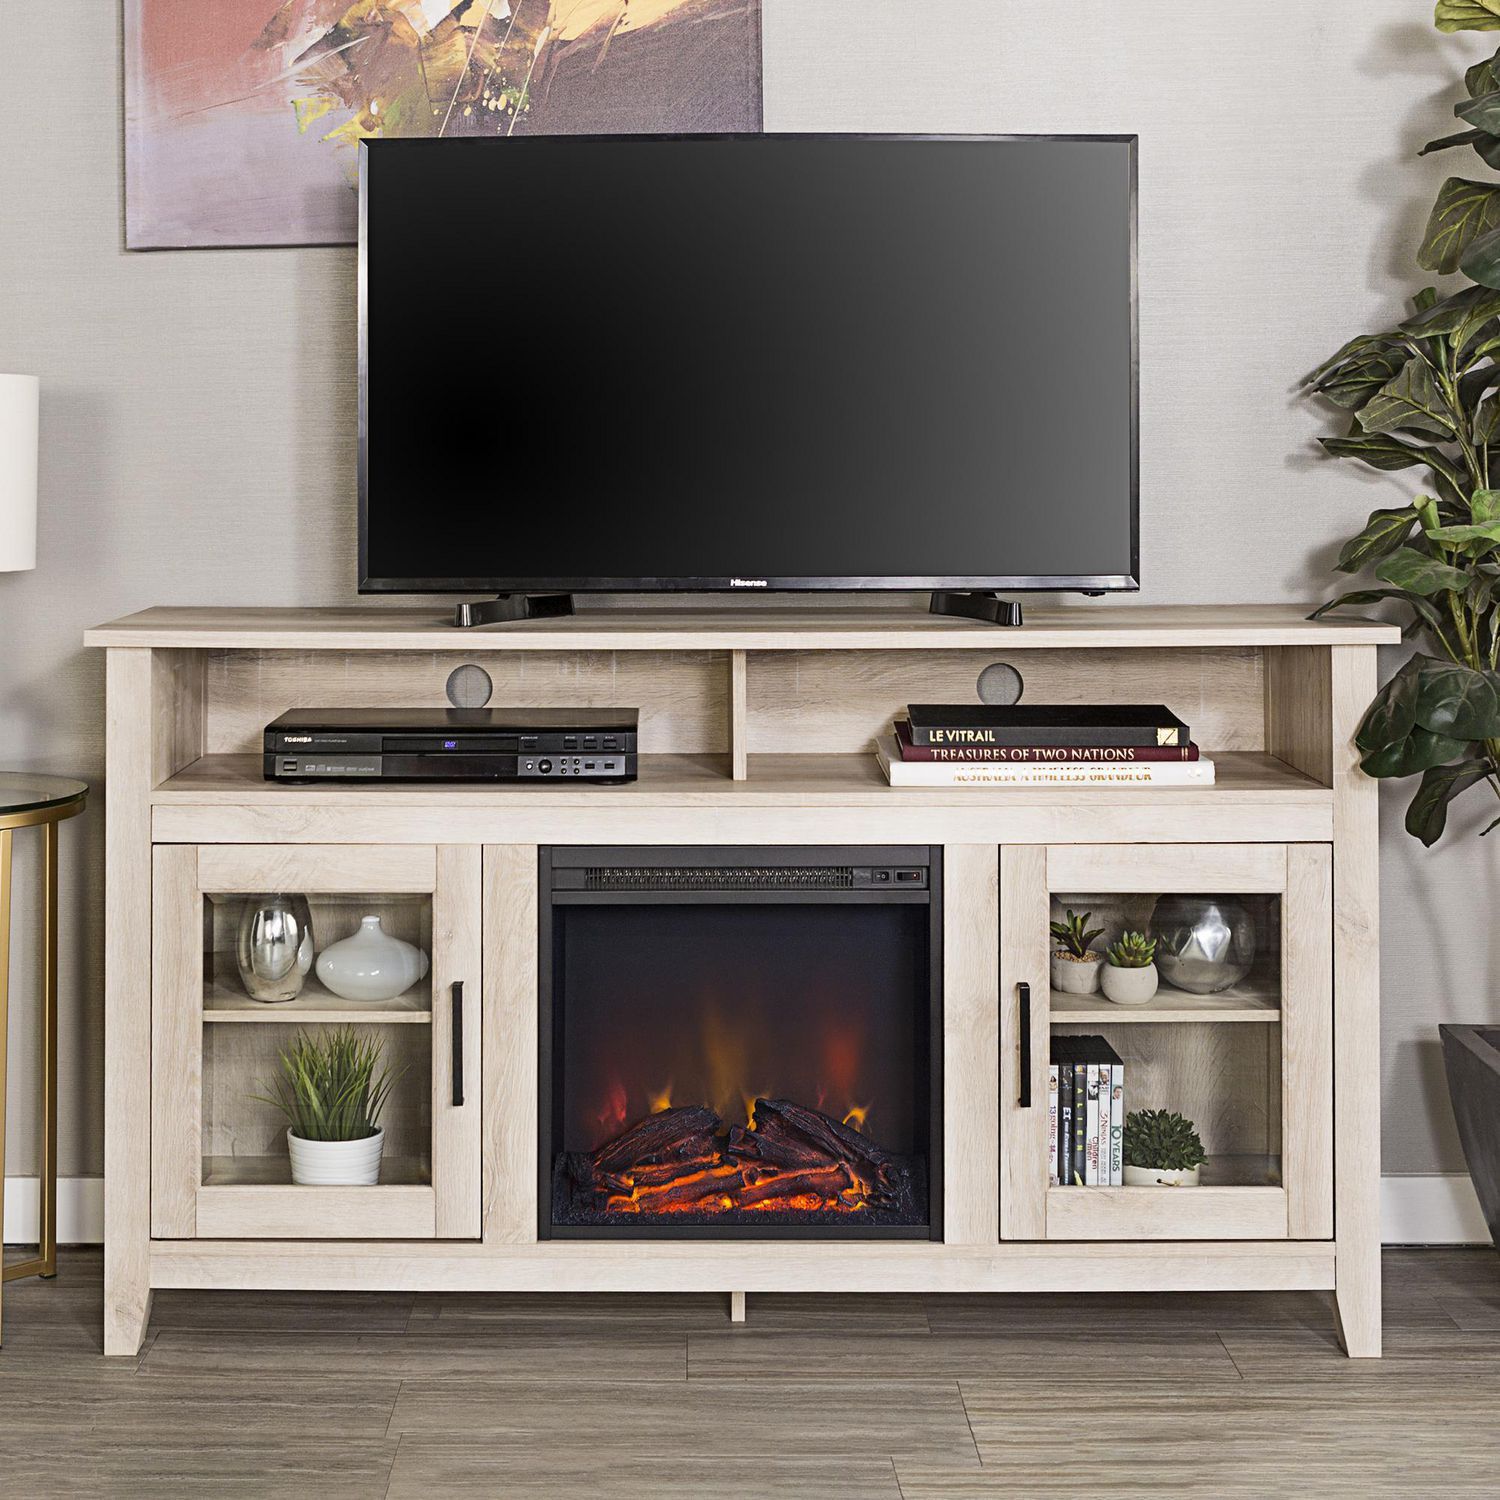 Manor Park 58" Wood Highboy Fireplace Media Tv Stand Console – White Throughout Wood Highboy Fireplace Tv Stands (Gallery 8 of 20)